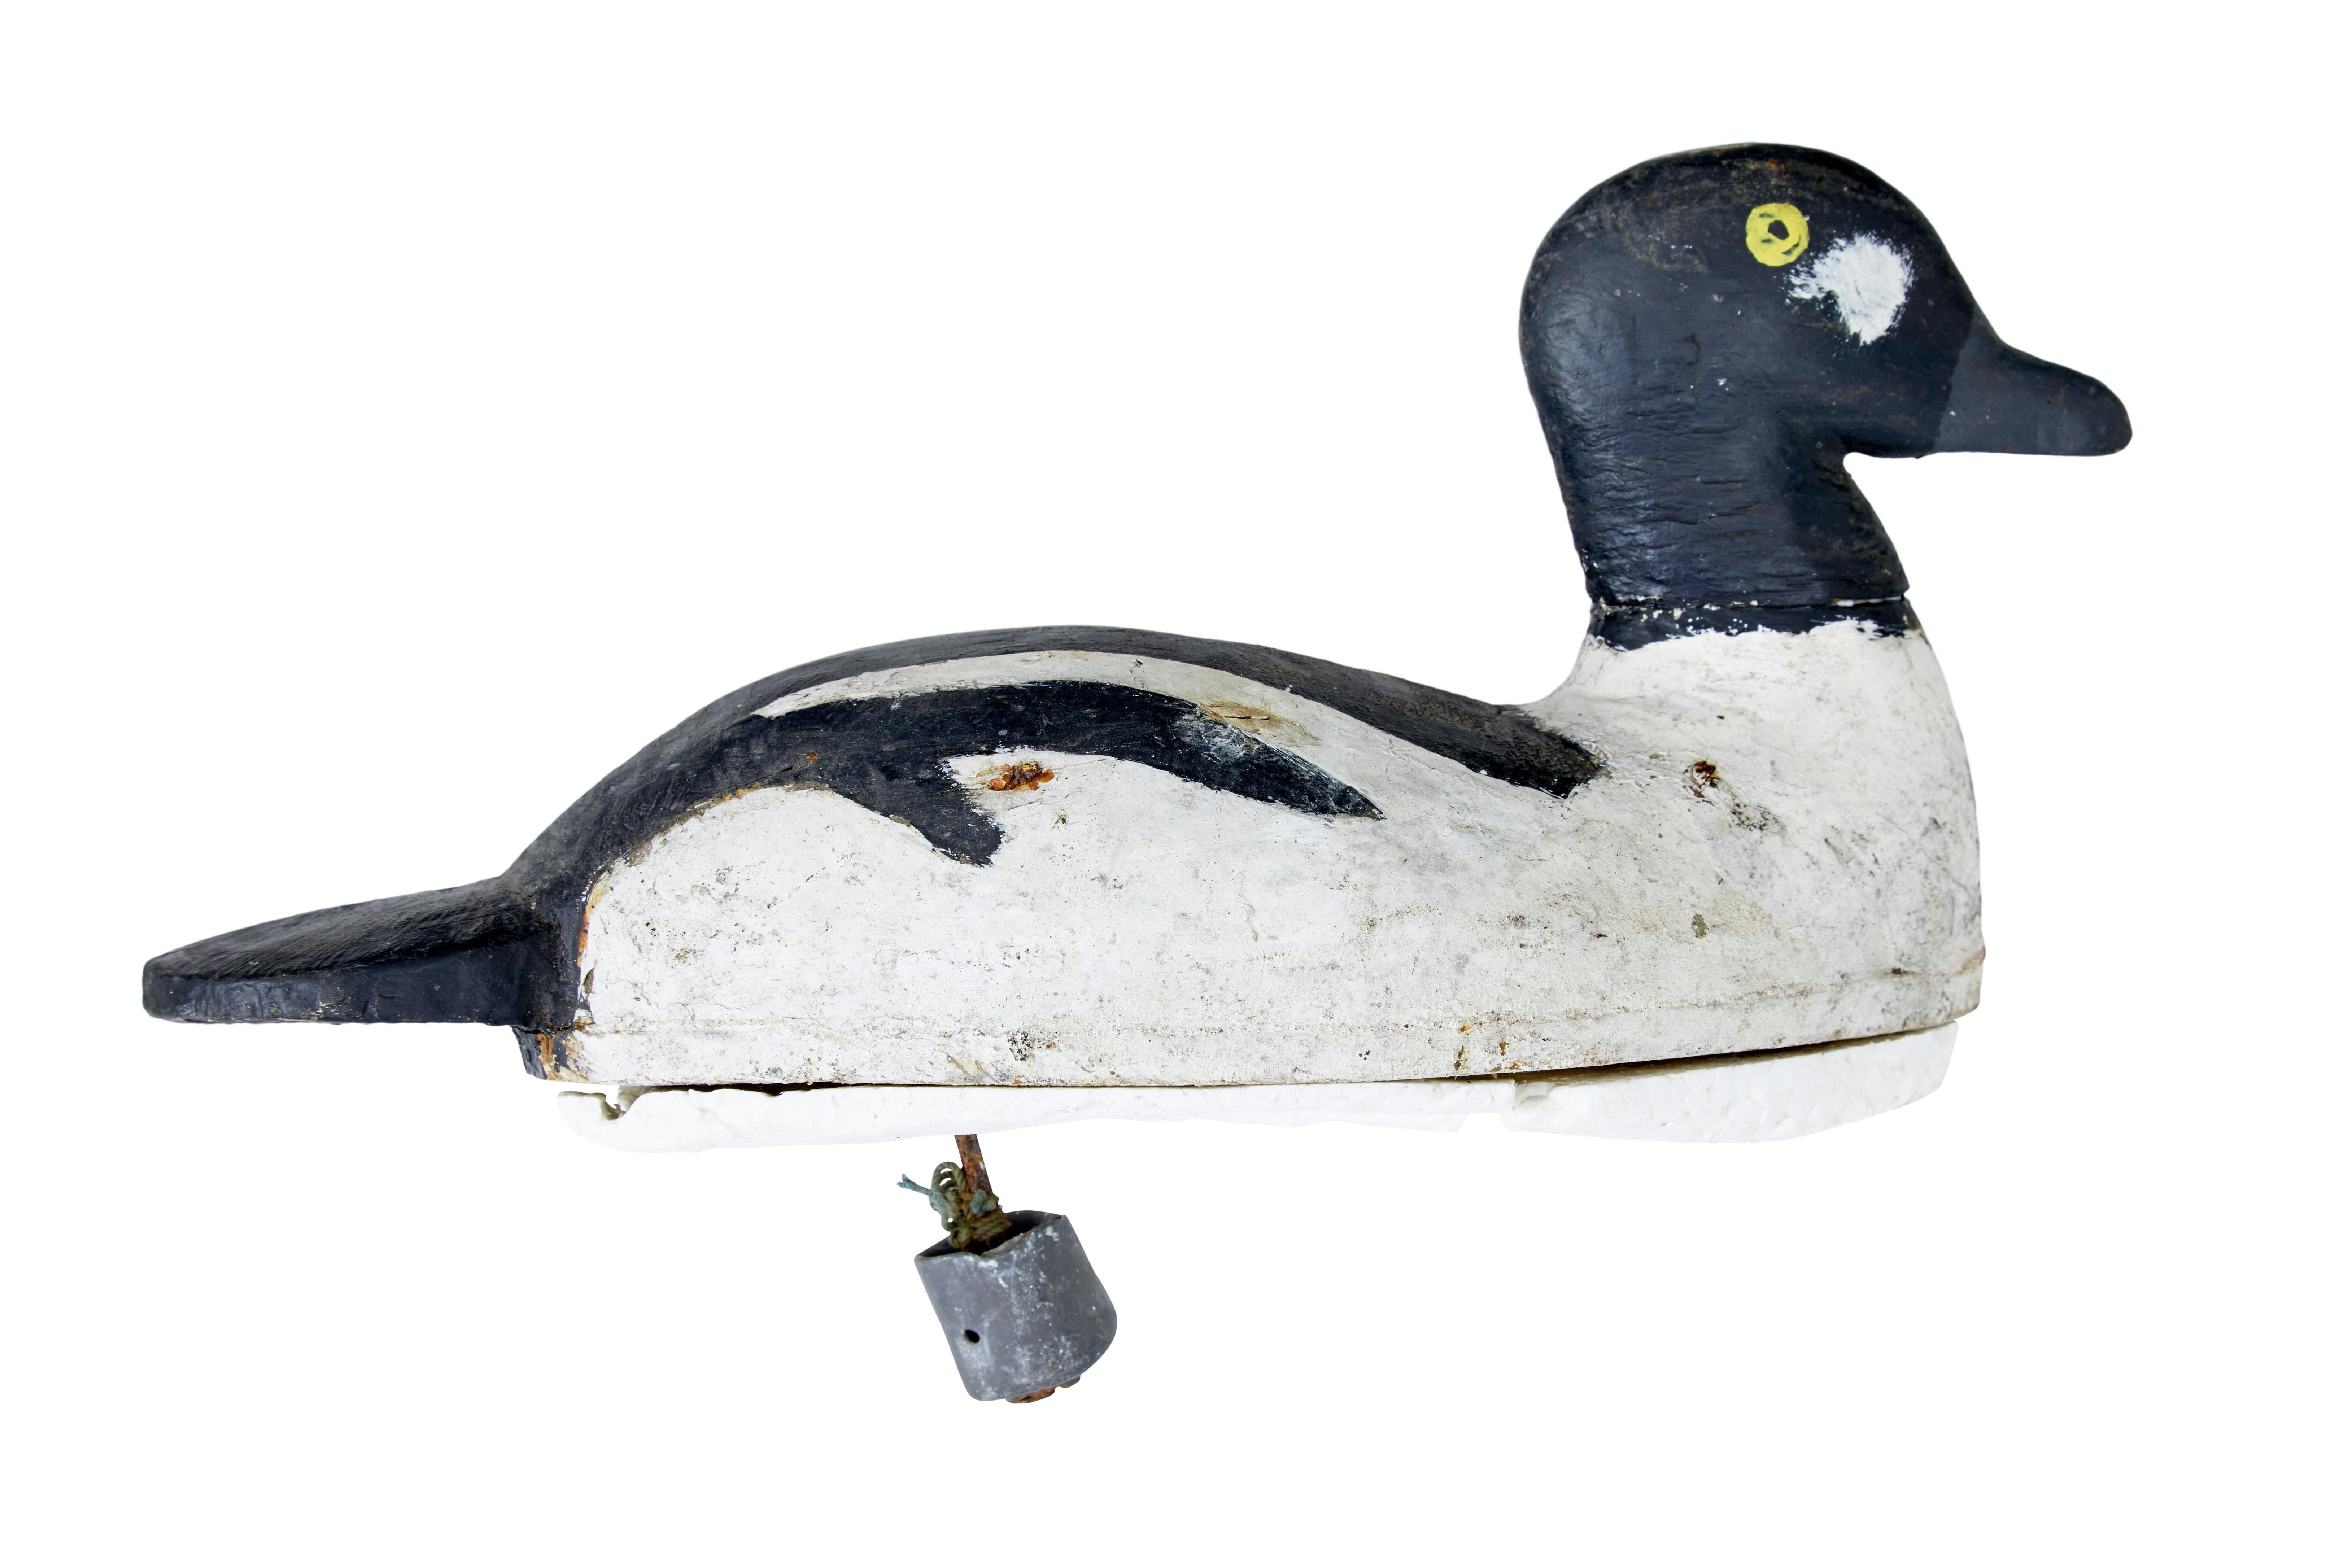 Early 19th century carved hand painted decoy circa 1920.

Hand painted Scandinavian decoy duck, black and white paint scheme with yellow eyes. Later fitted with shaped polysterene float and lead weight.

Expected paint losses and wear.